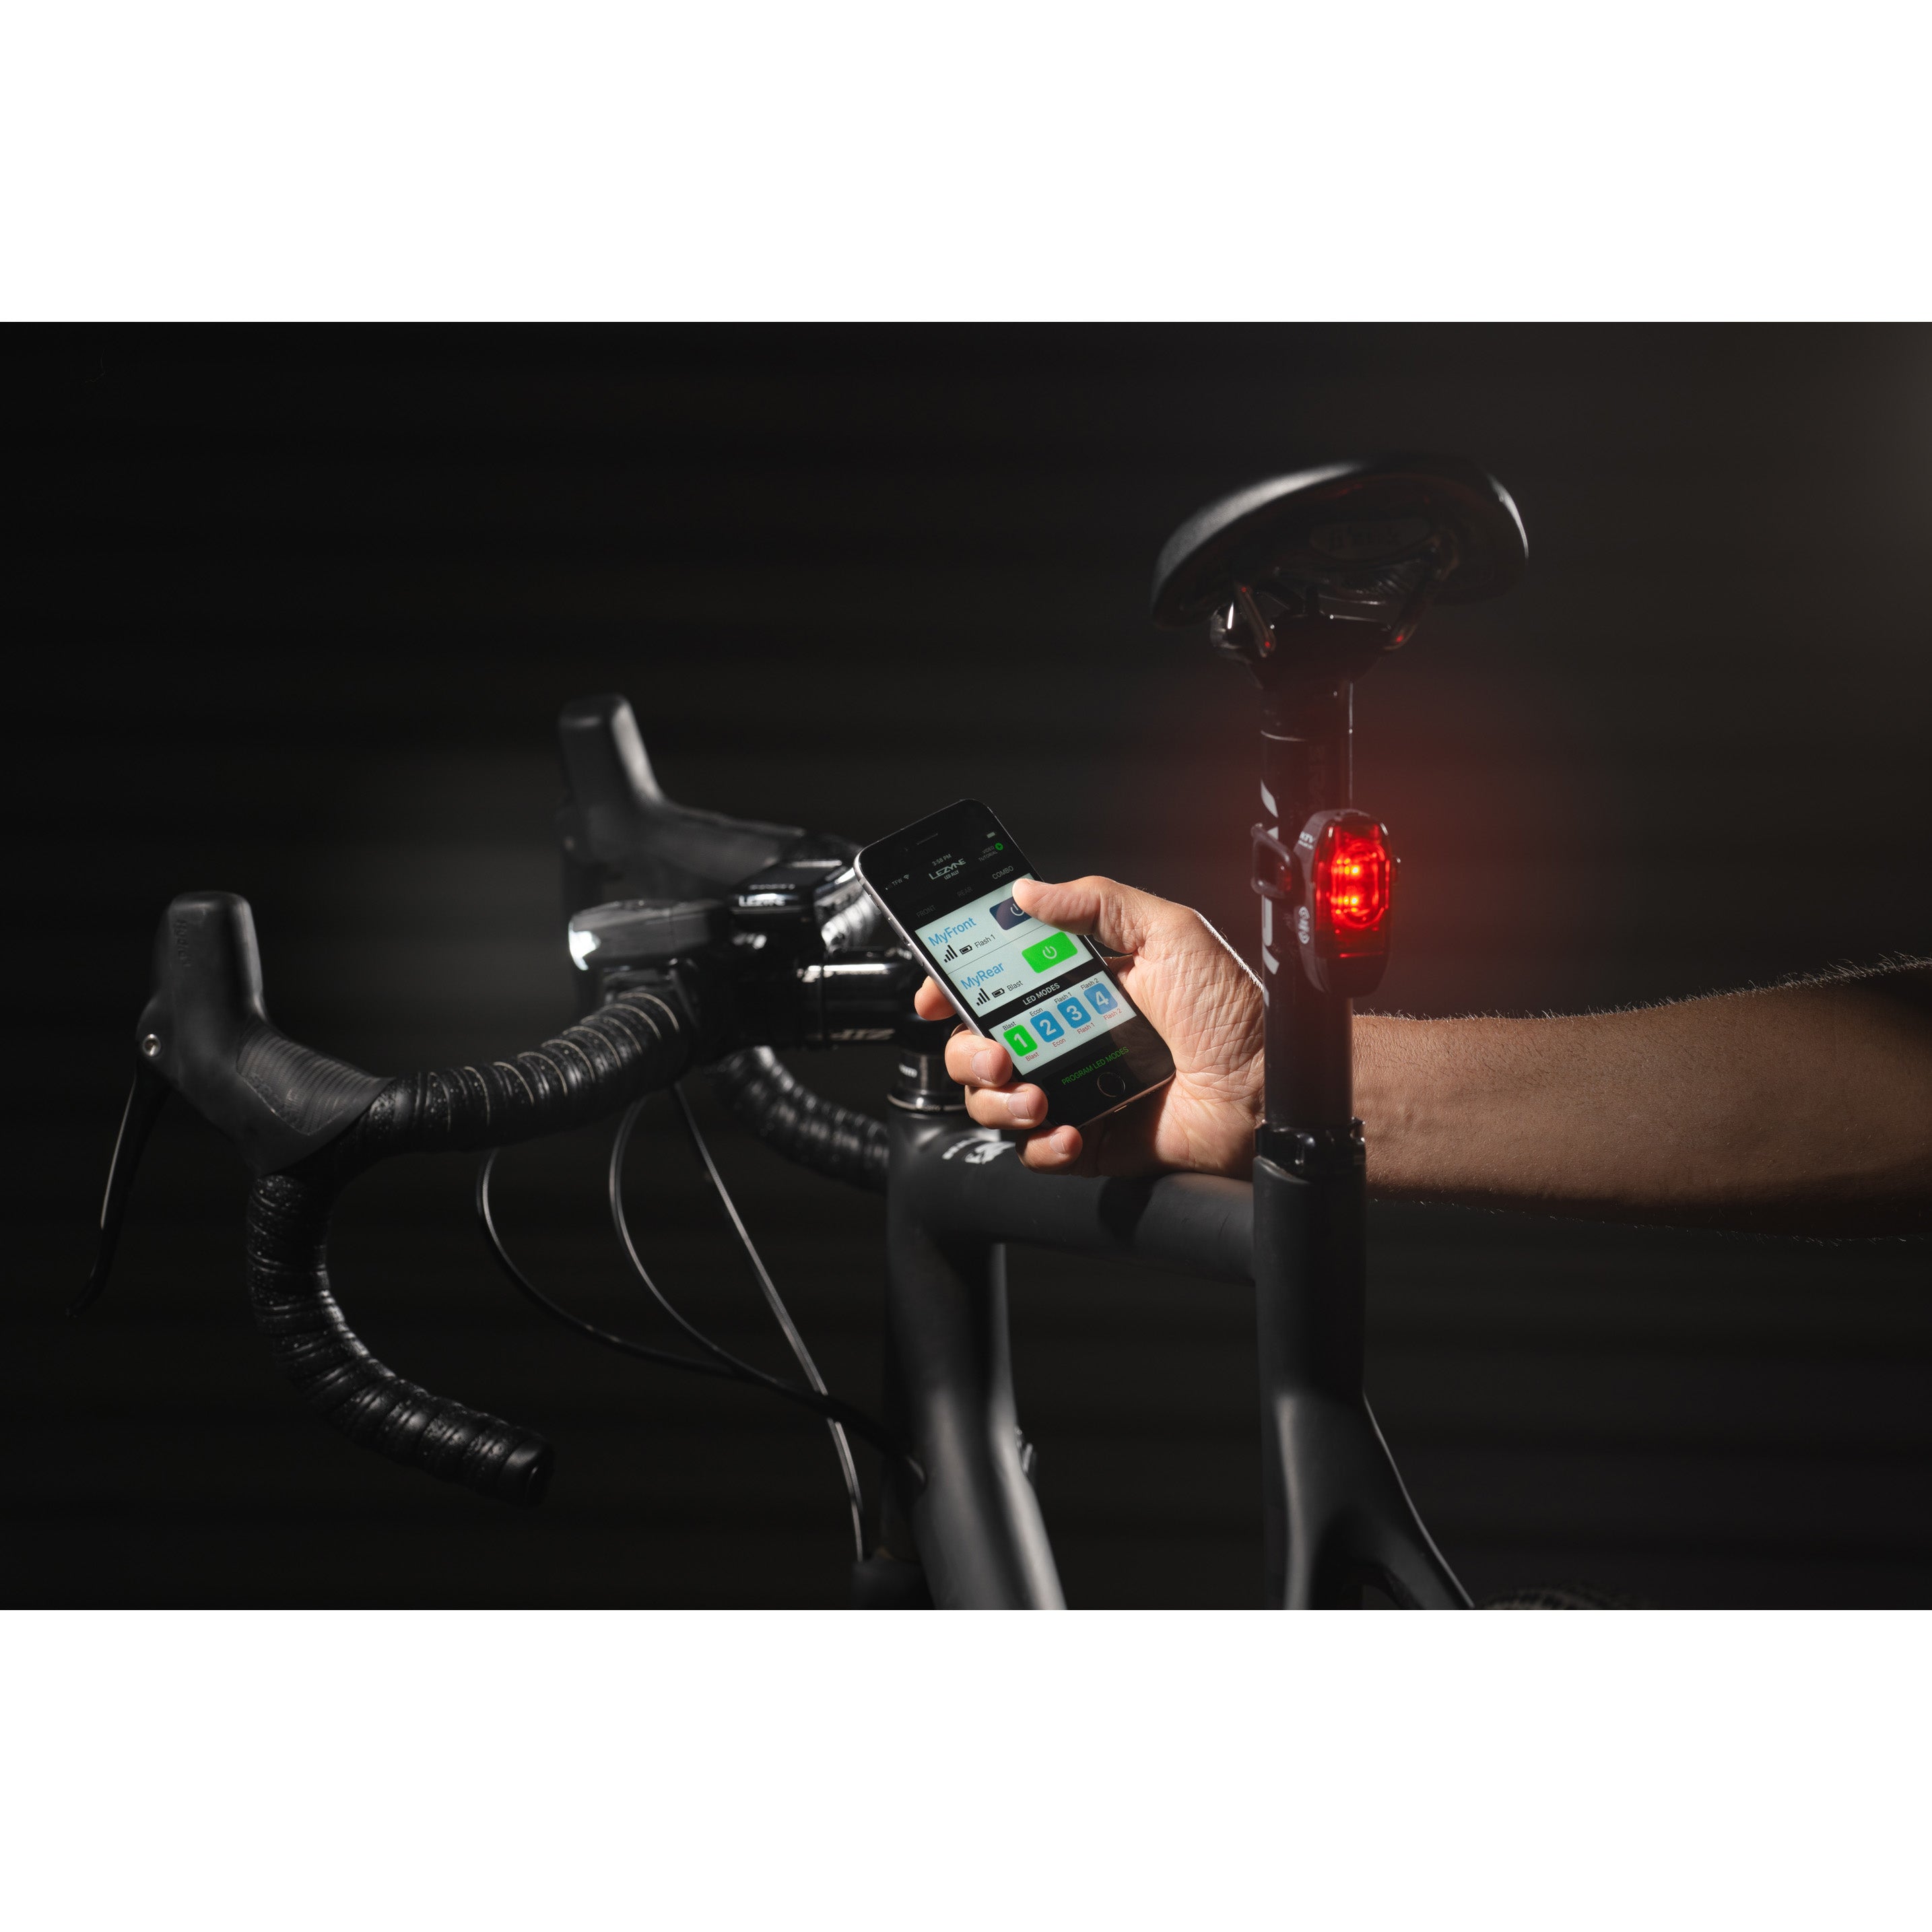 featuring Lezyne's smart connectivity with KTV Drive front bike light and KTV Drive Pro Smart rear bike light.